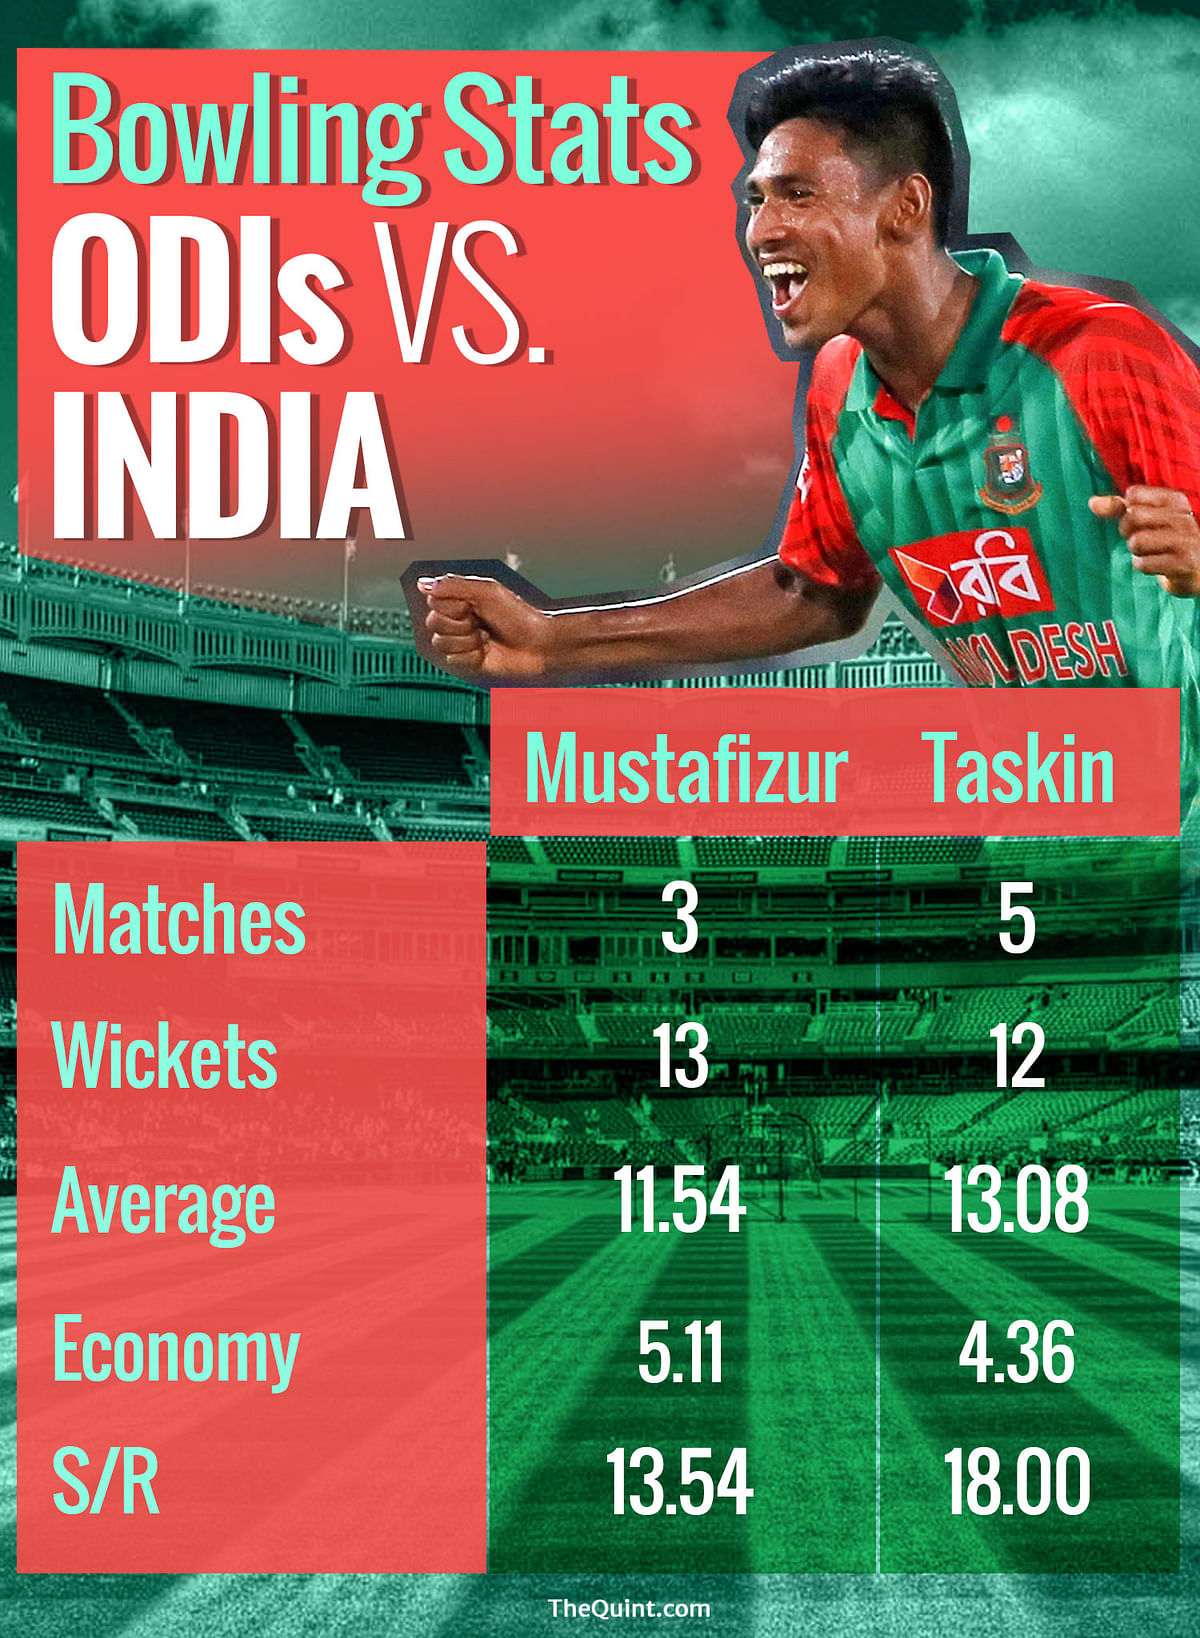 Bangladesh’s first ICC event semis, a stage where India are a regular feature.